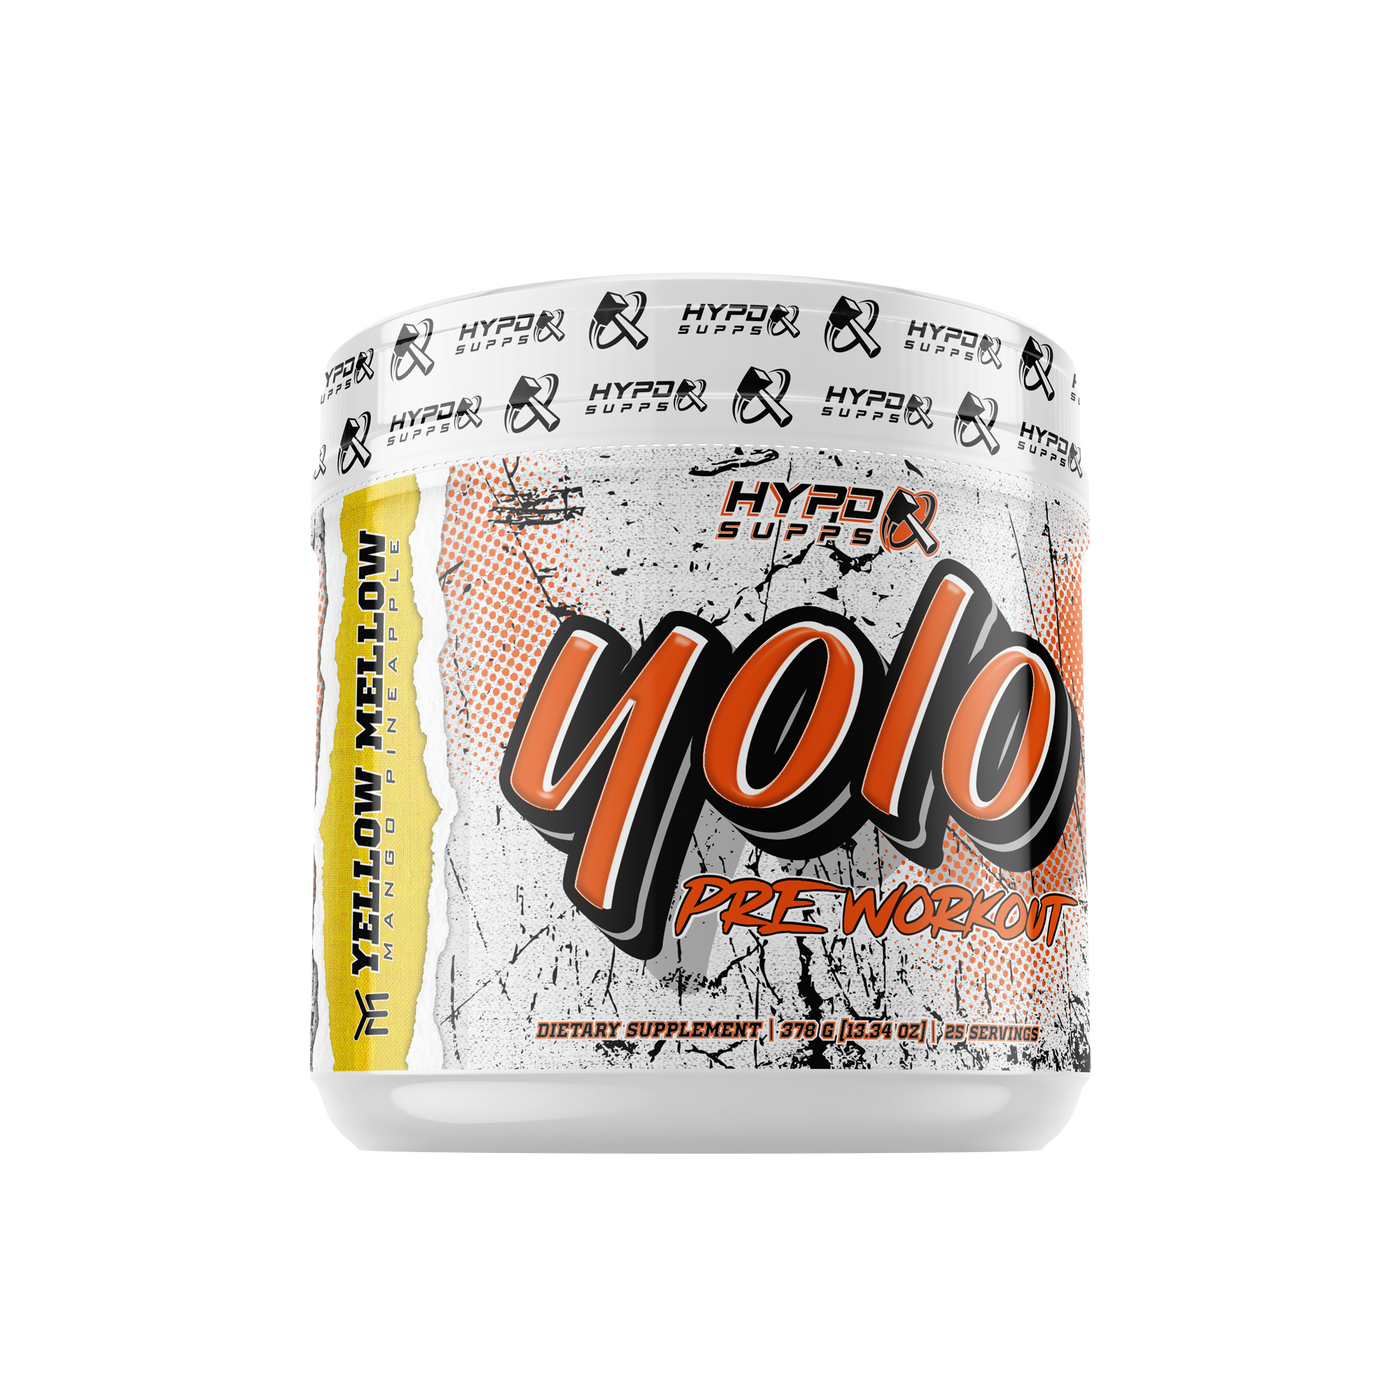 HYPD Supps | YOLO Light Side HYPD Supps $44.95